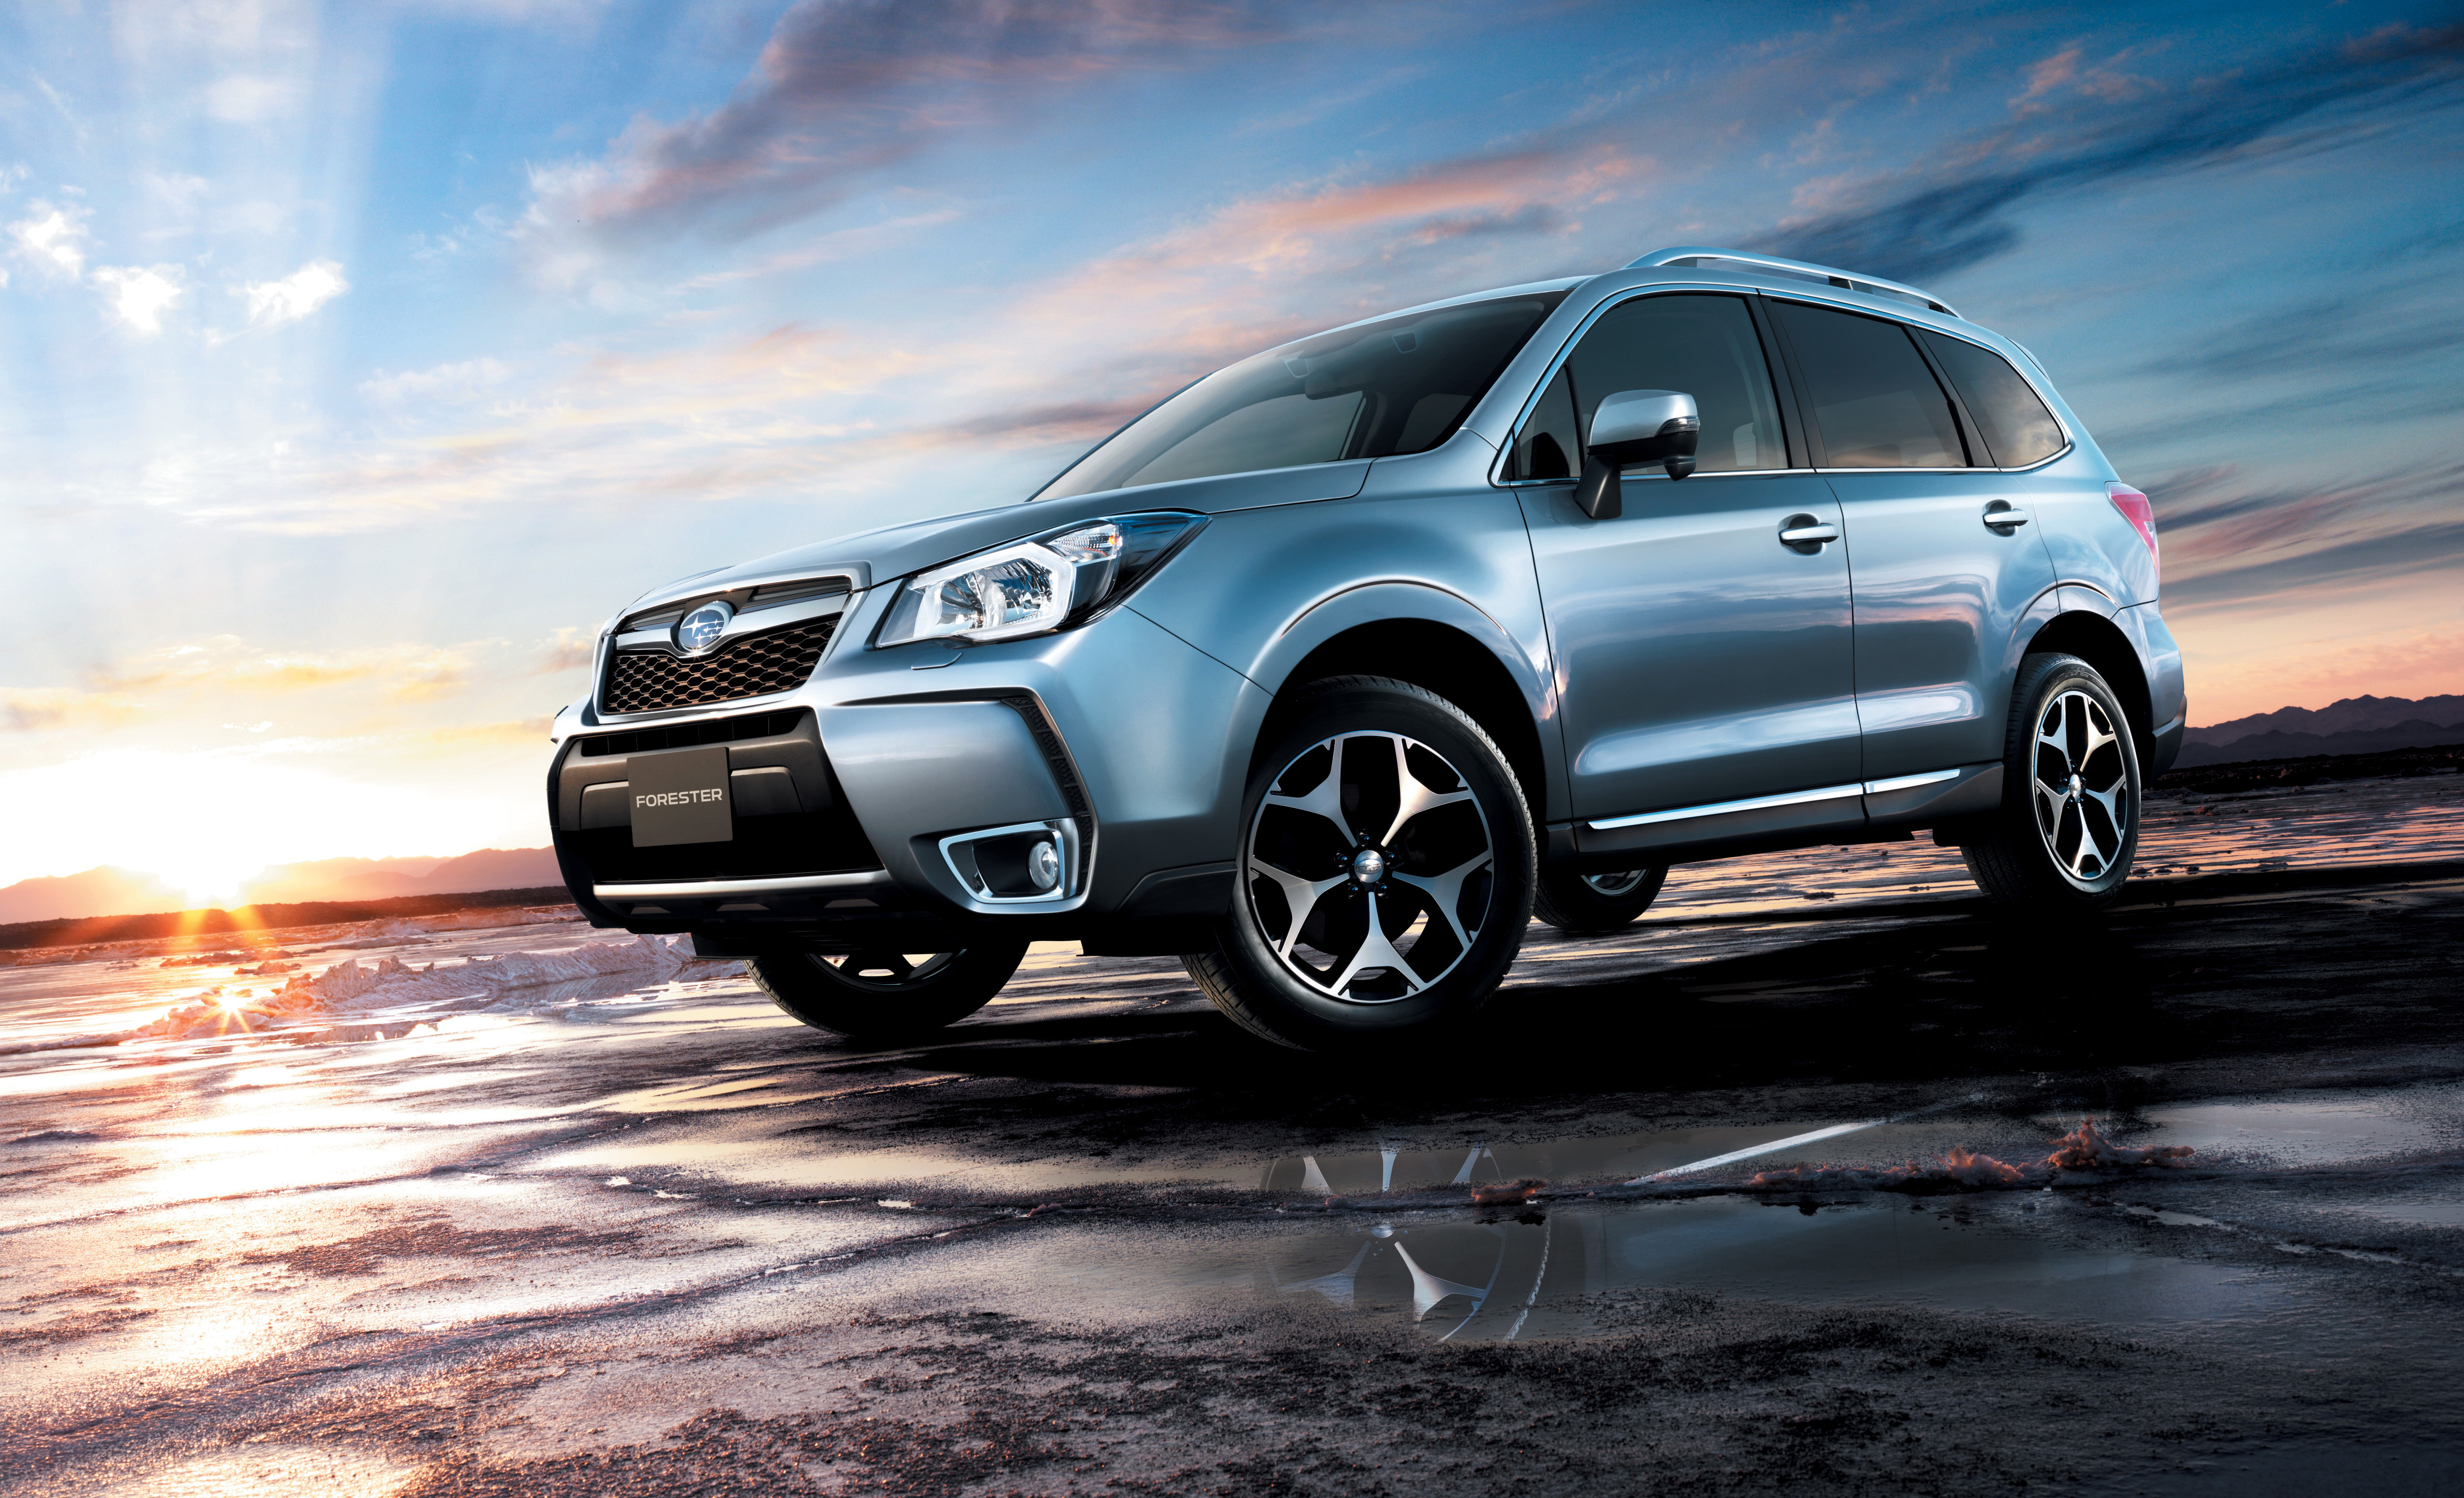 The new Subaru Forester has arrived on the local market